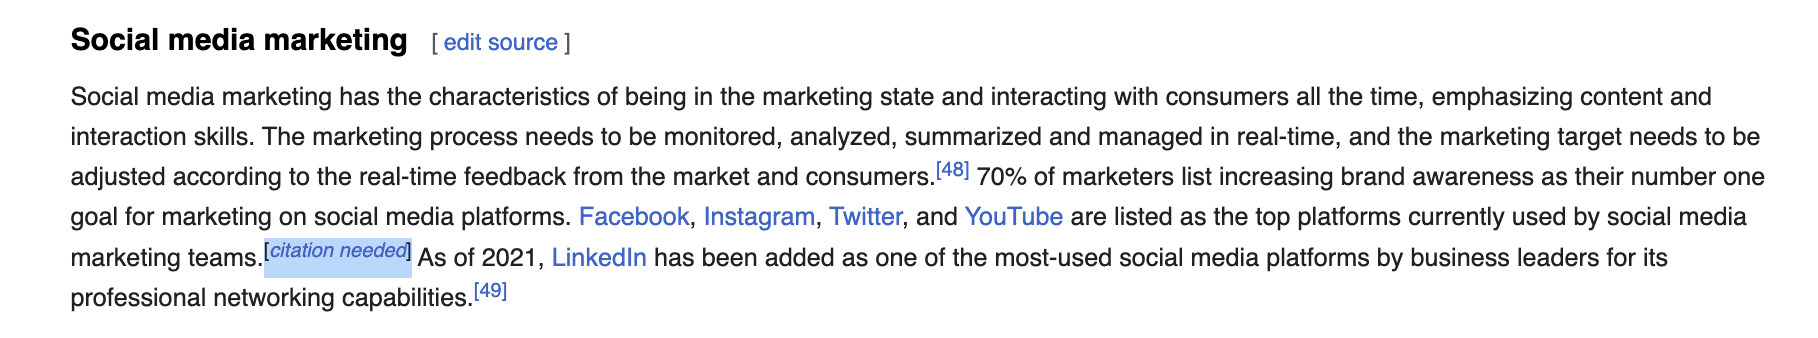 Citation needed tag on the digital marketing Wikipedia page.